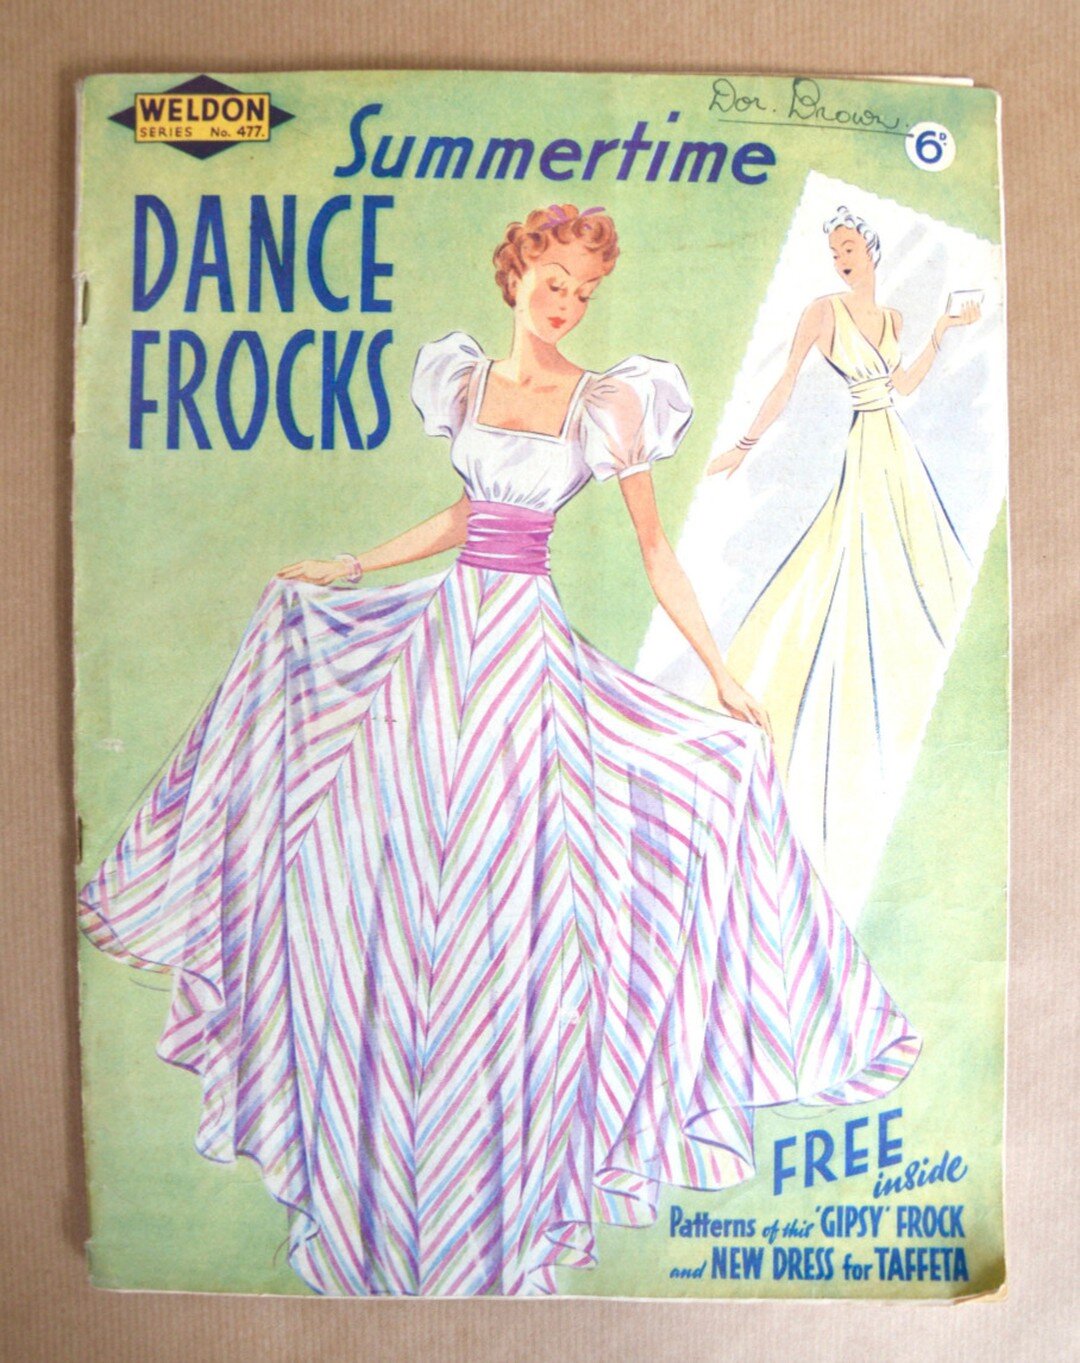 SOLD! I've only a few of these 1930s-1940s vintage sewing magazines left, out of a huge lot I bought years ago. Sadness! This one was issued just before the outbreak of WW2 (thus the copious amount of fabric still suggested on the cover dresses) and 